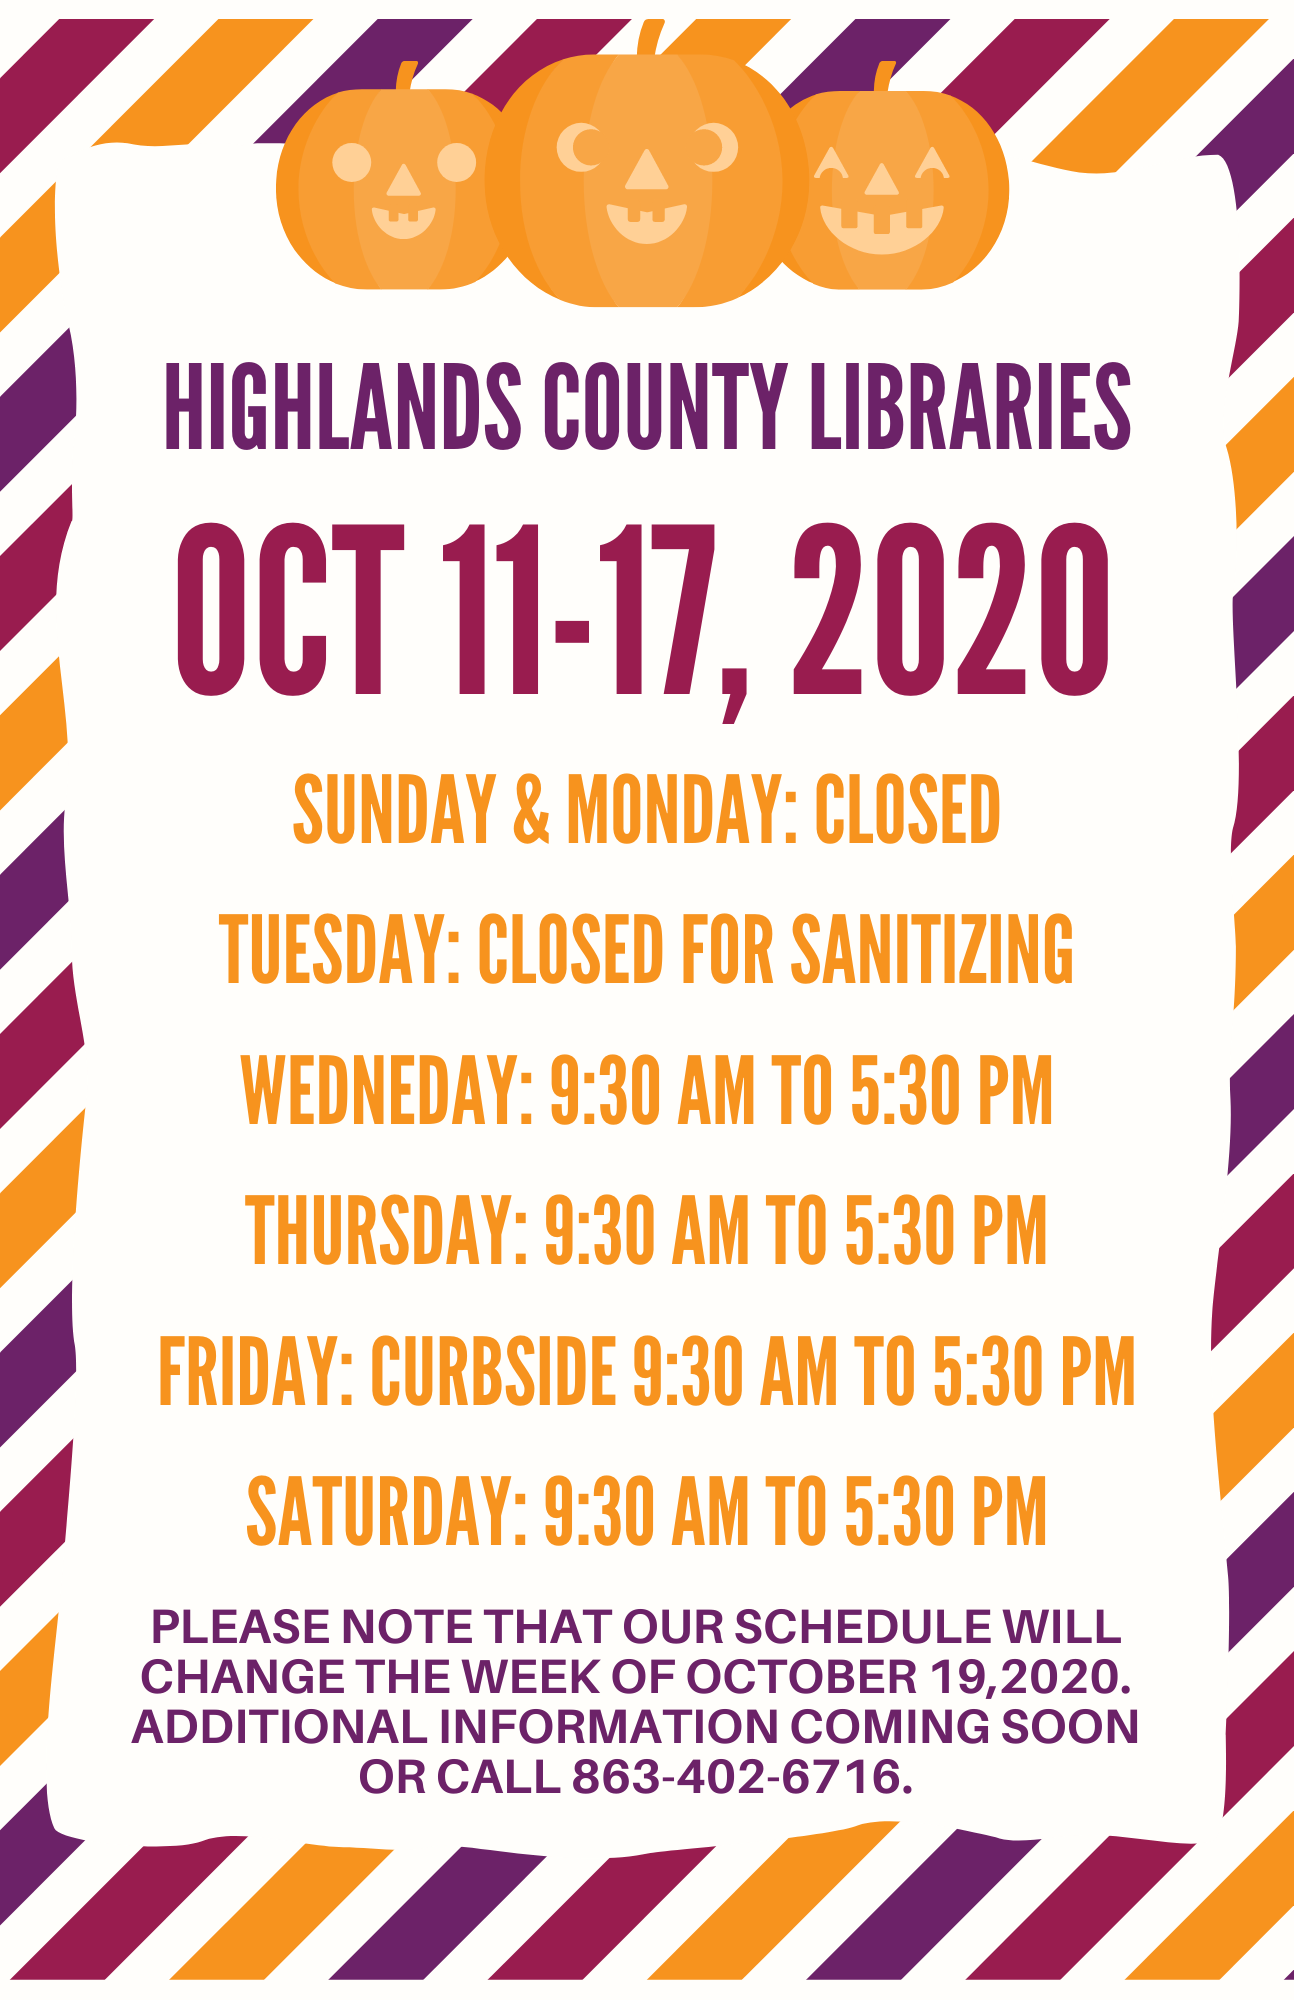 Highlands County Library Schedule:  Sunday & Monday: Closed Tuesday: Closed (Staff sanitizing materials for your usage) Wednesday & Thursday: 9:30 AM to 5:30 PM Friday: Curbside/walk up services 9:30 AM to 5:30 PM Saturday: 9:30 AM to 5:30 PM Please note that our schedule will change the week of October 19,2020. Additional information coming soon or call 863-402-6716.